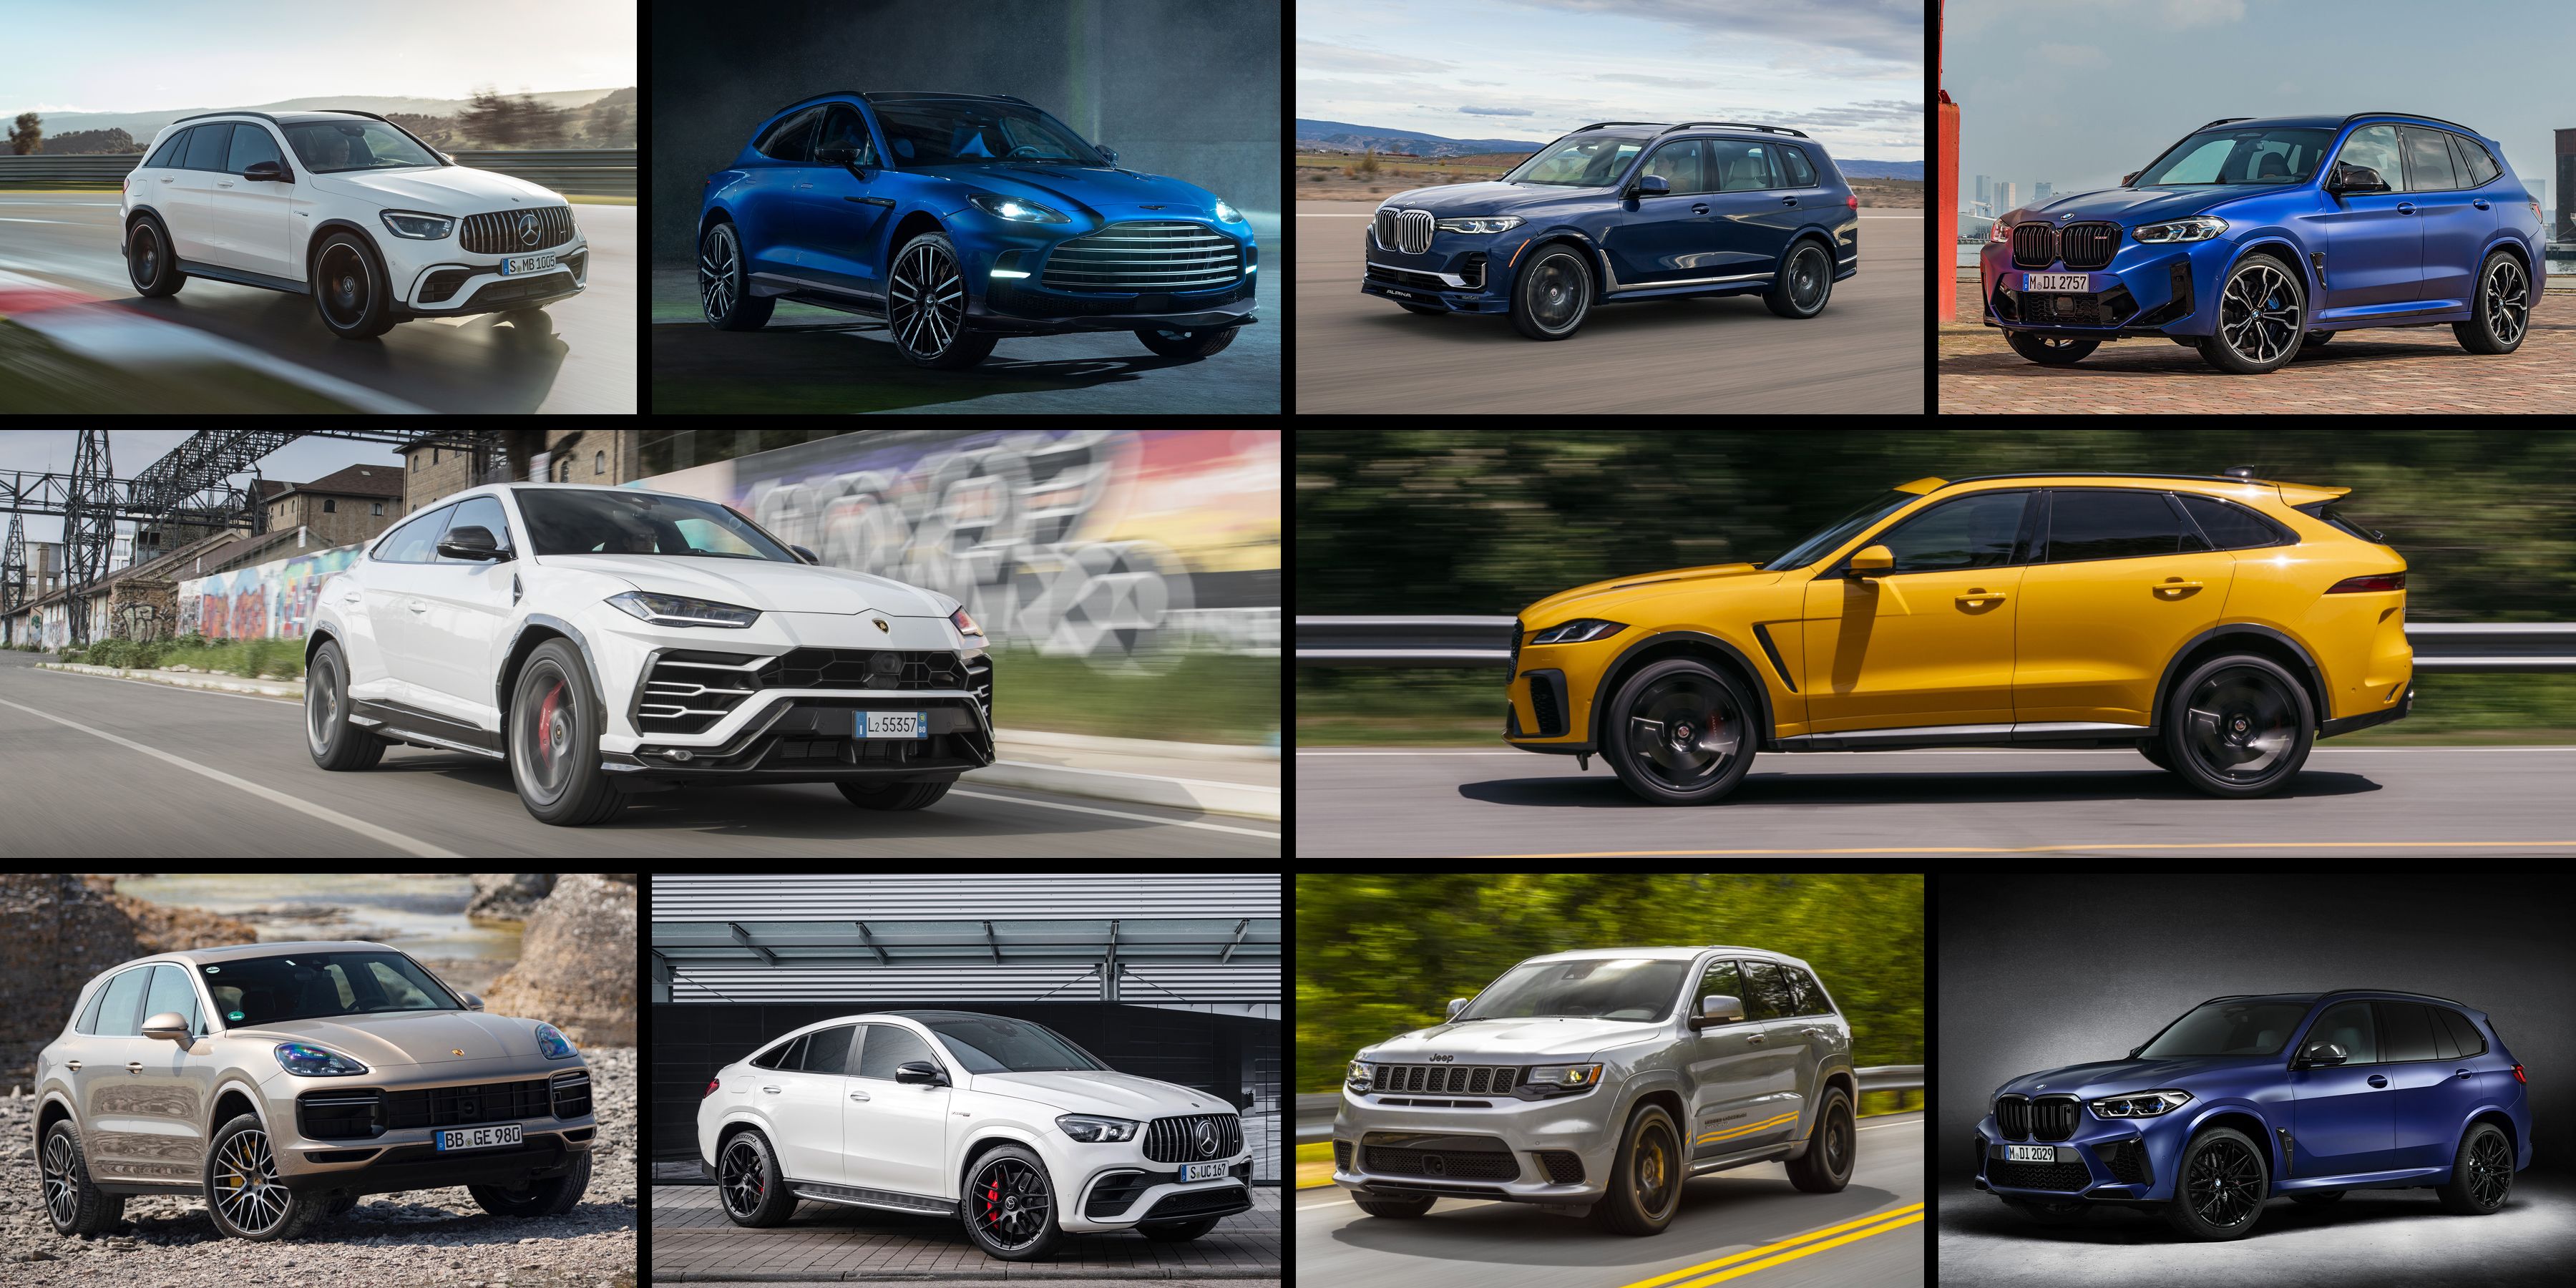 20 of the Most Powerful SUVs and Crossovers You Can Buy